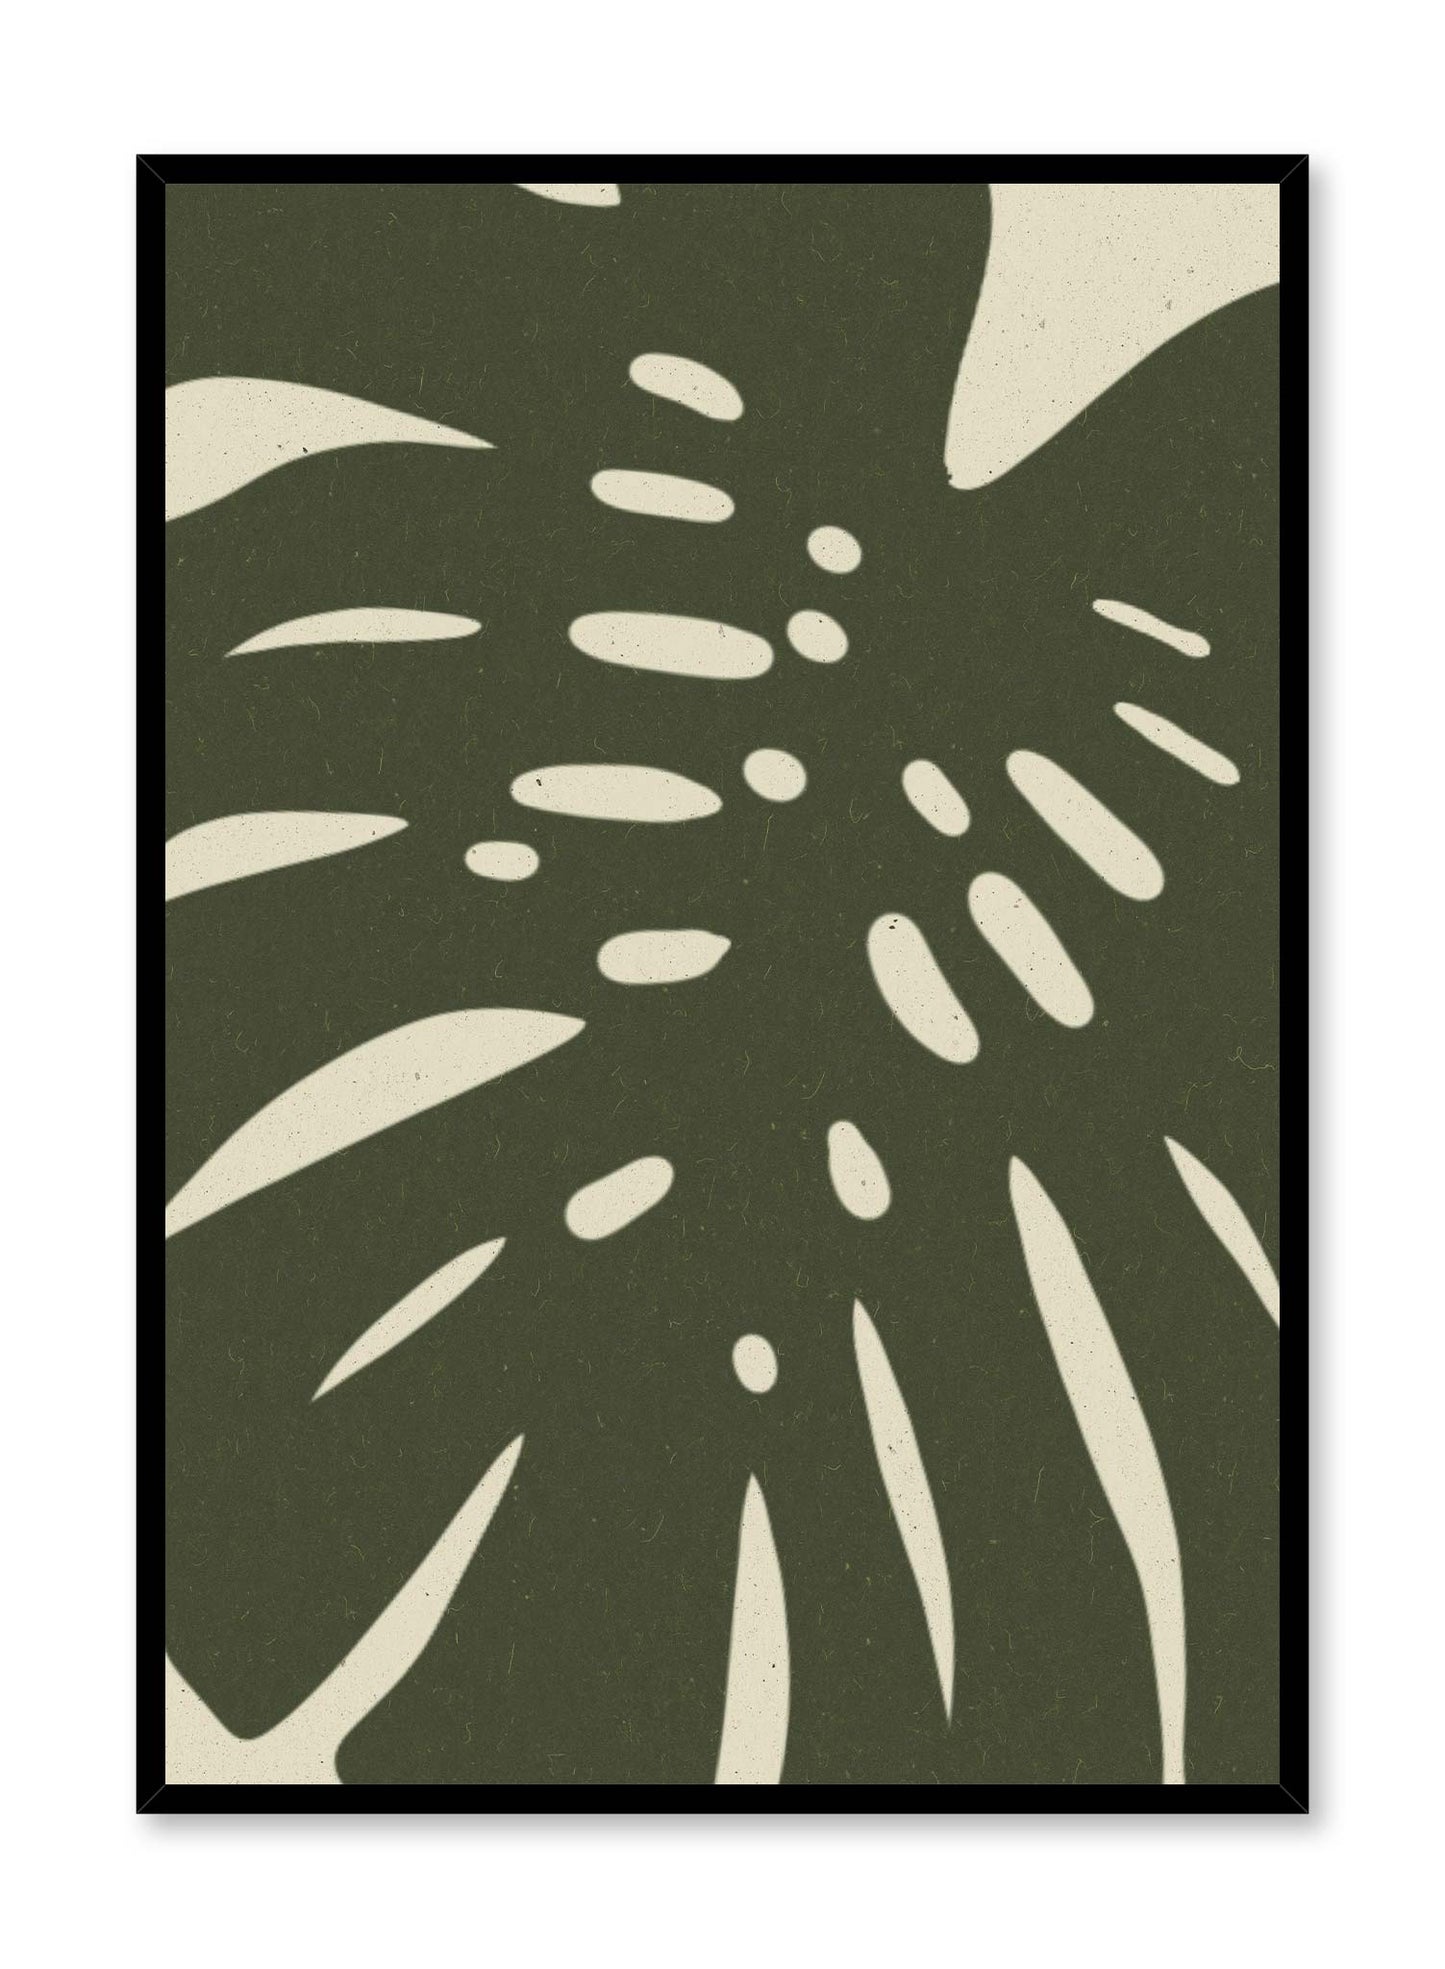 Monstera Shadow is a minimalist illustration of the close-up view of a monstera leaf showing its details by Opposite Wall.